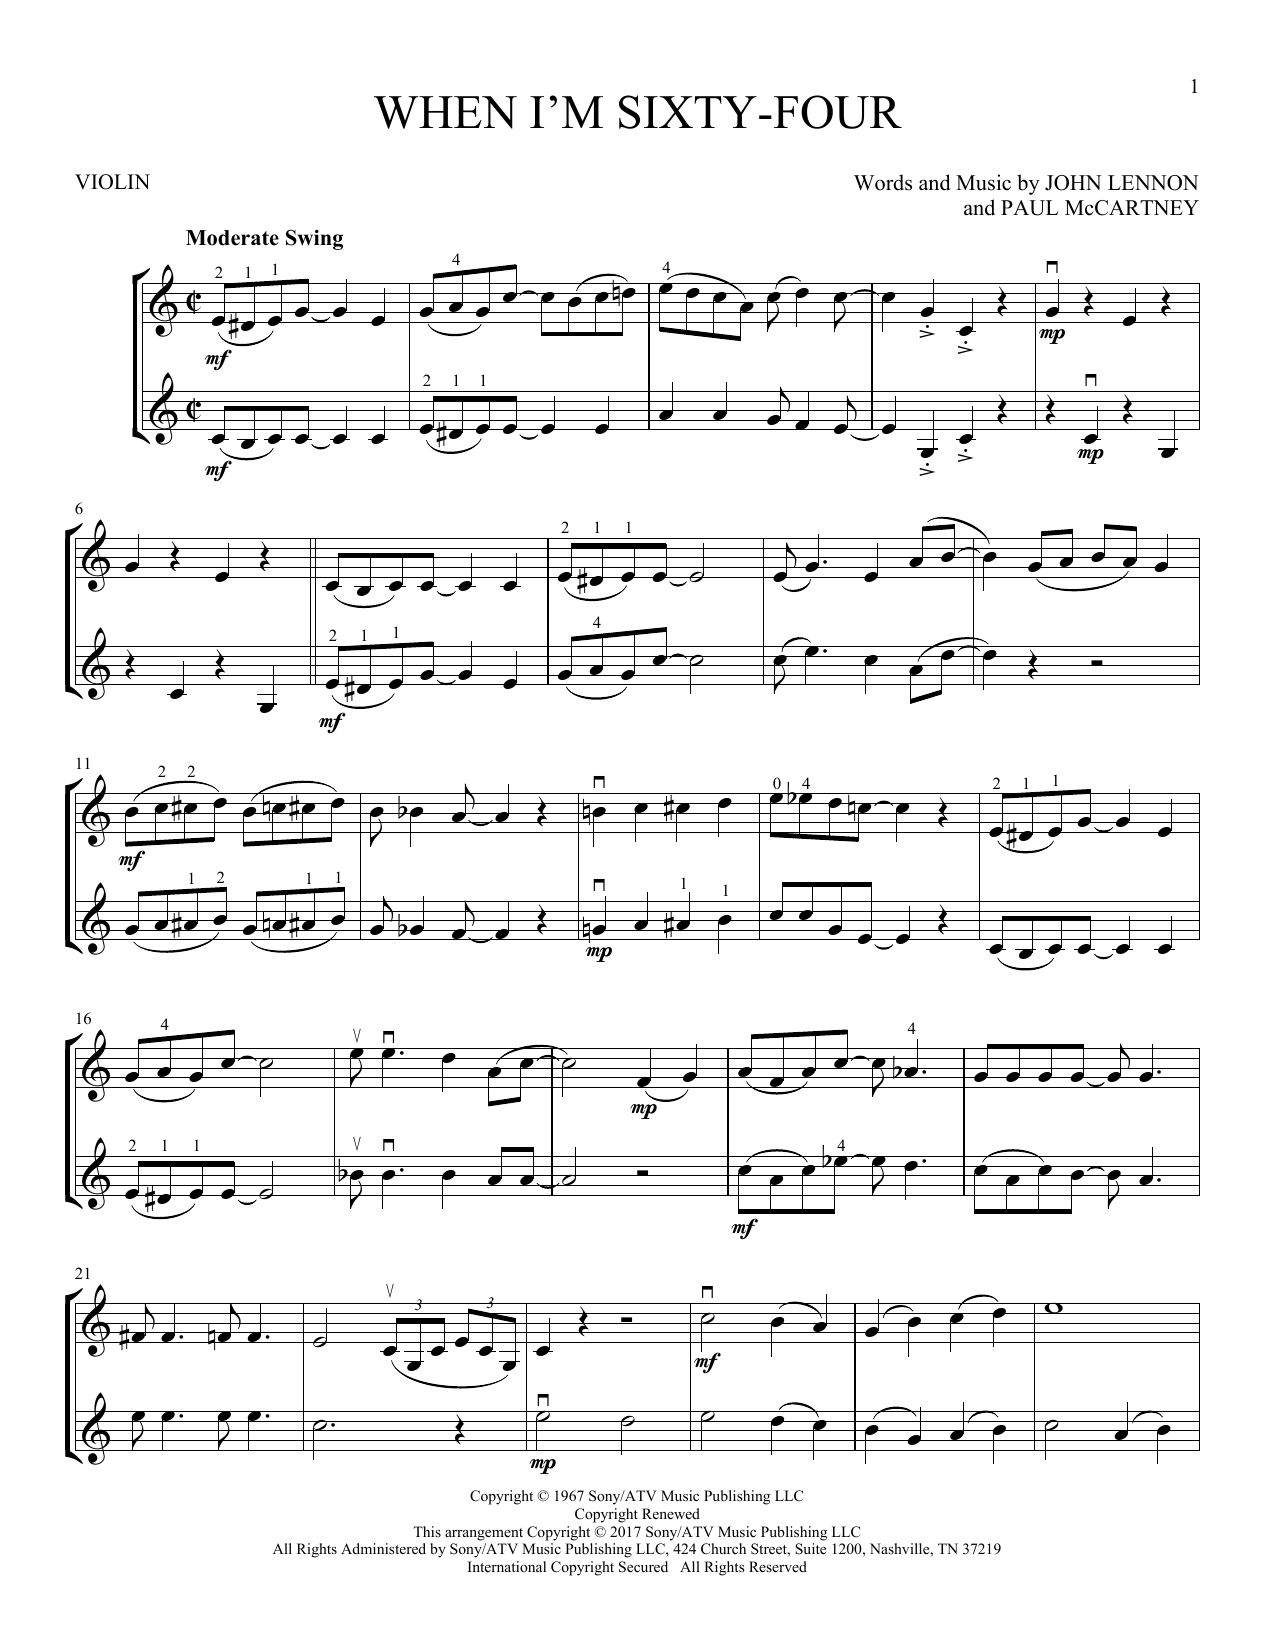 Abigarrado comedia Brutal The Beatles "When I'm Sixty-Four" Sheet Music Notes | Download Printable  PDF Score 76068